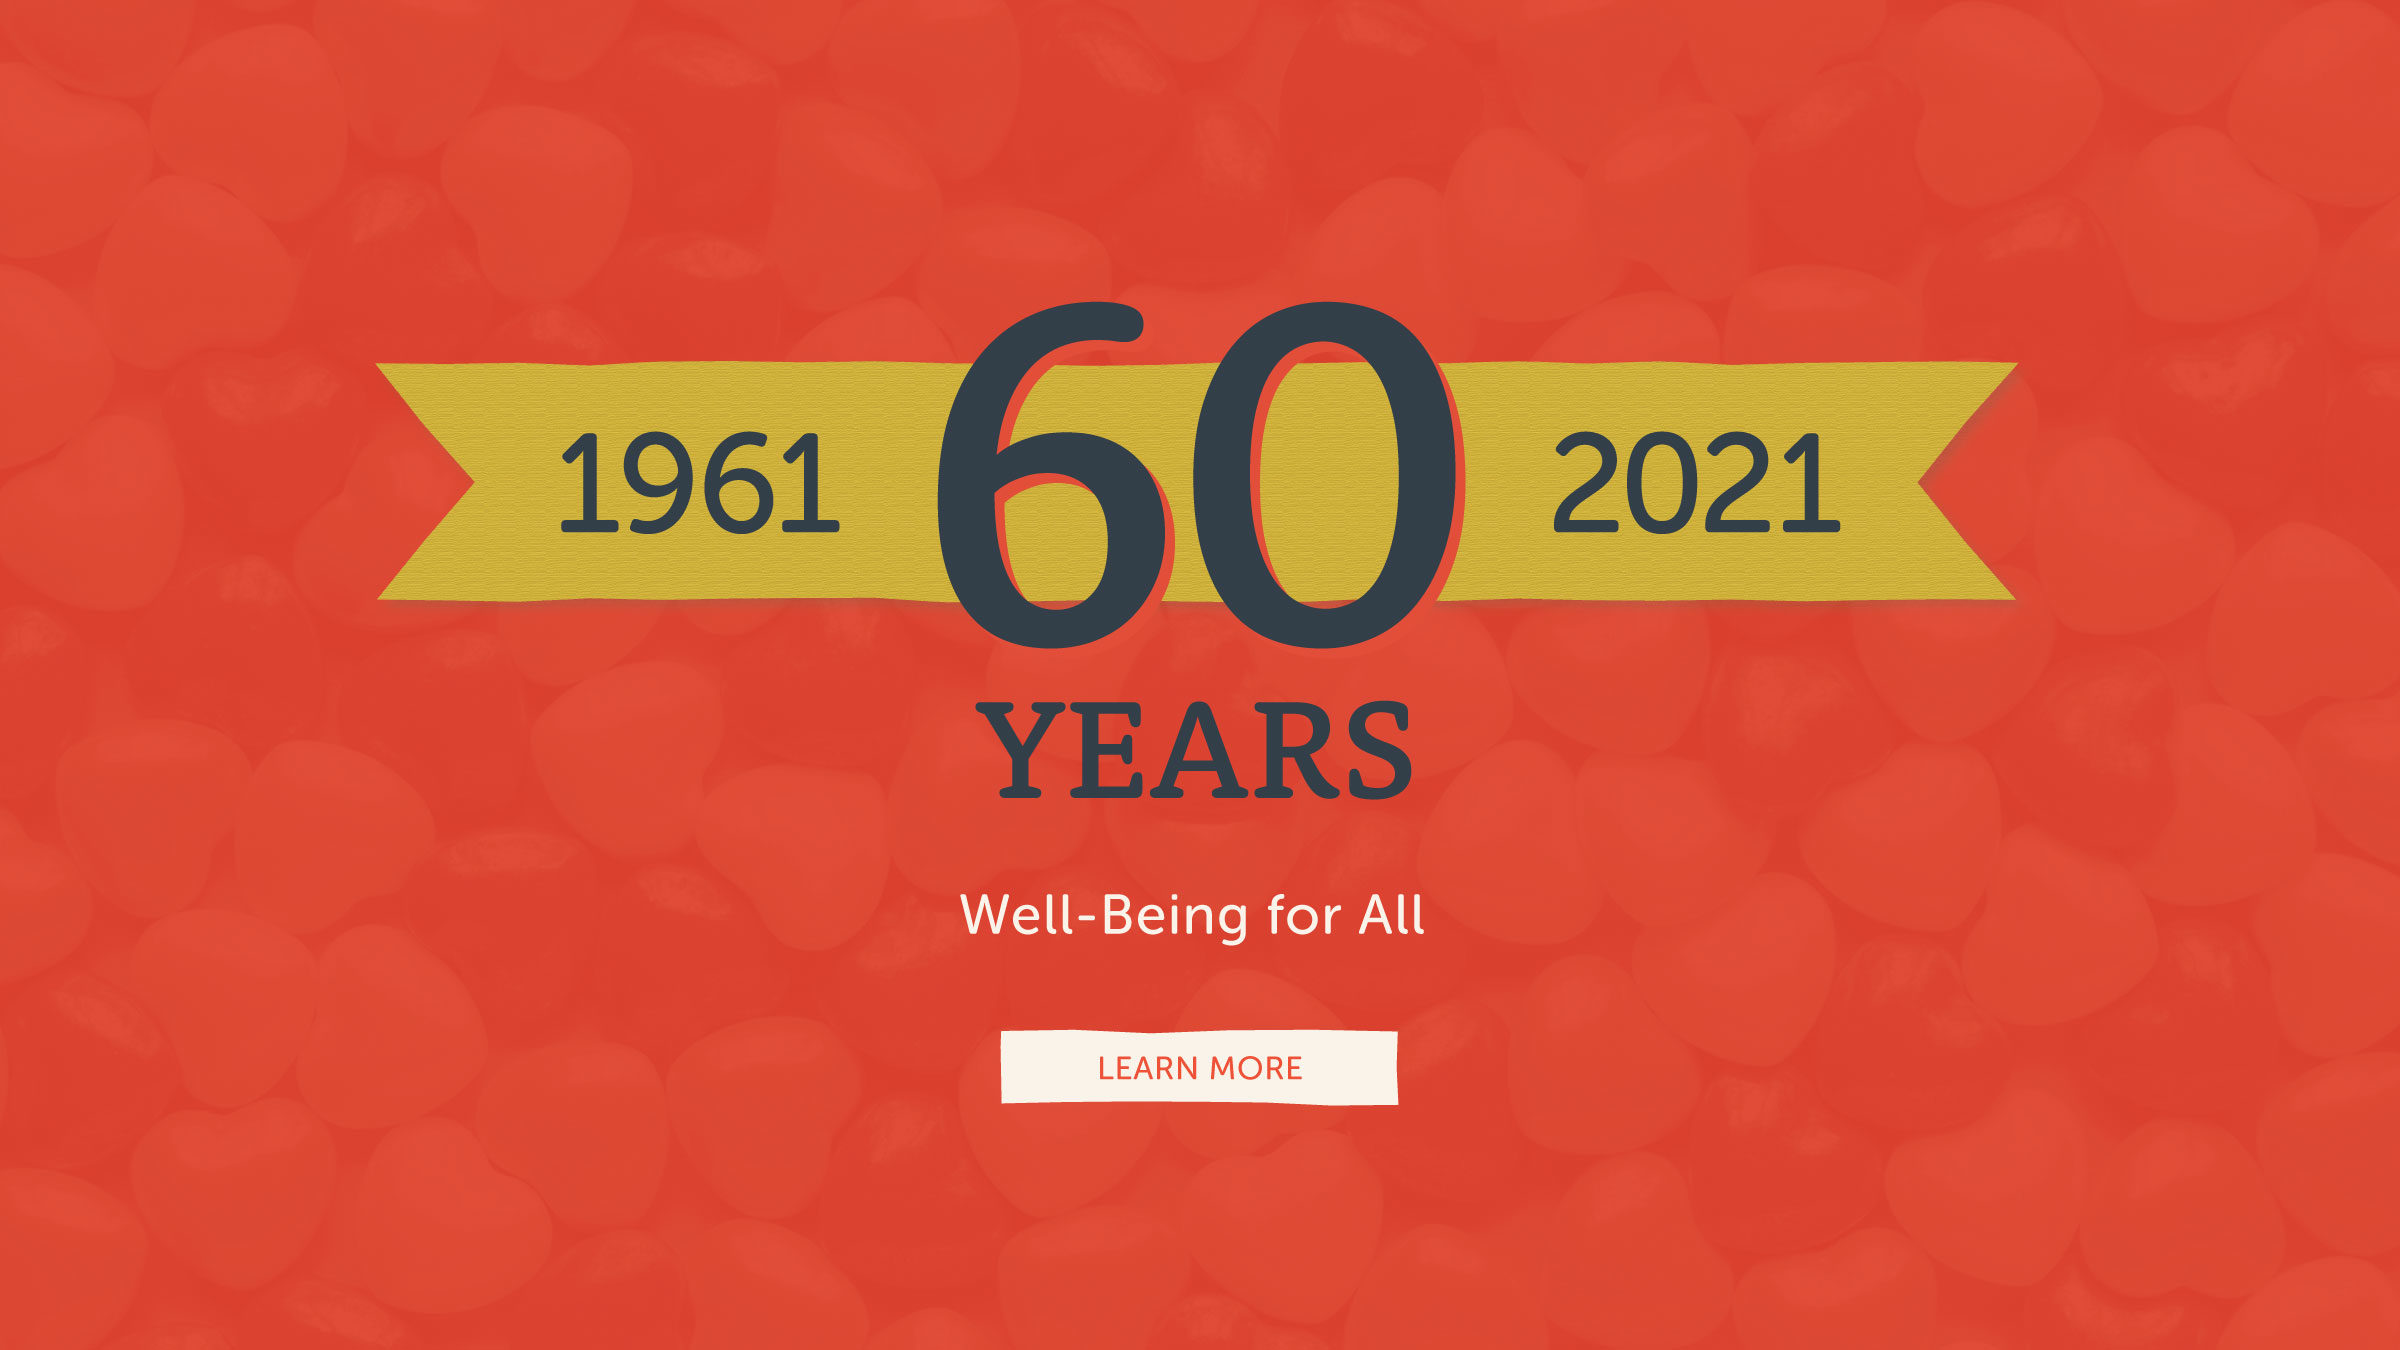 LifeWorks NW has been helping the Portland, Oregon community for the past 60 years.